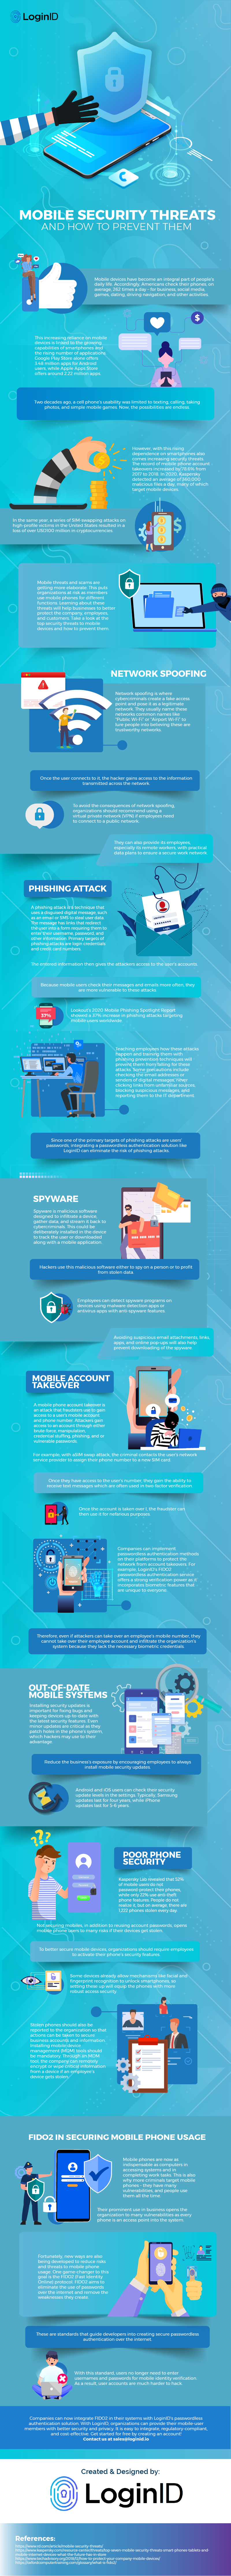 Mobile-Security-Threats-and-How-to-Prevent-Them-infographic-image